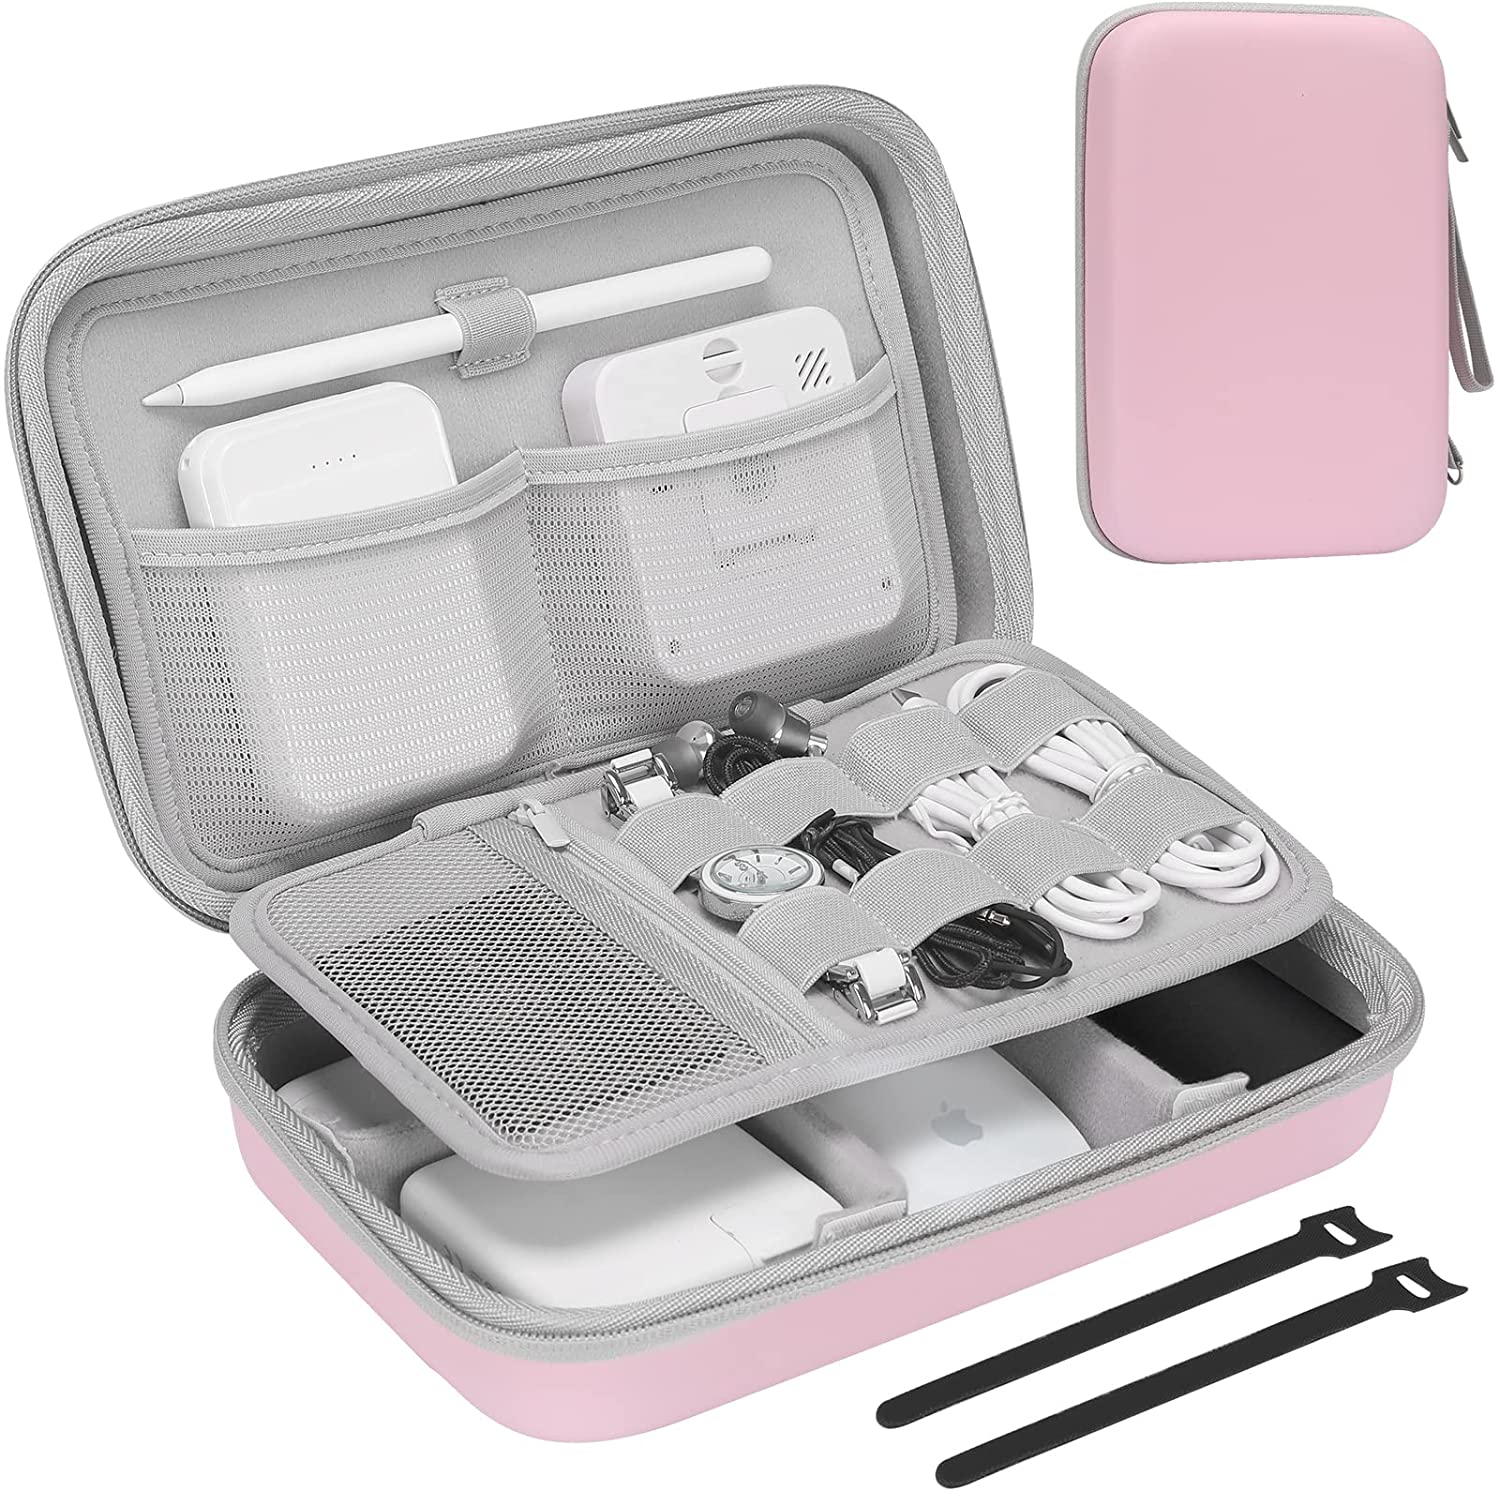 Hard Shell EVA Electronic Organizer Case for iPad Earphone Charger Cables  Electronic Accessories Travel Storage Bag